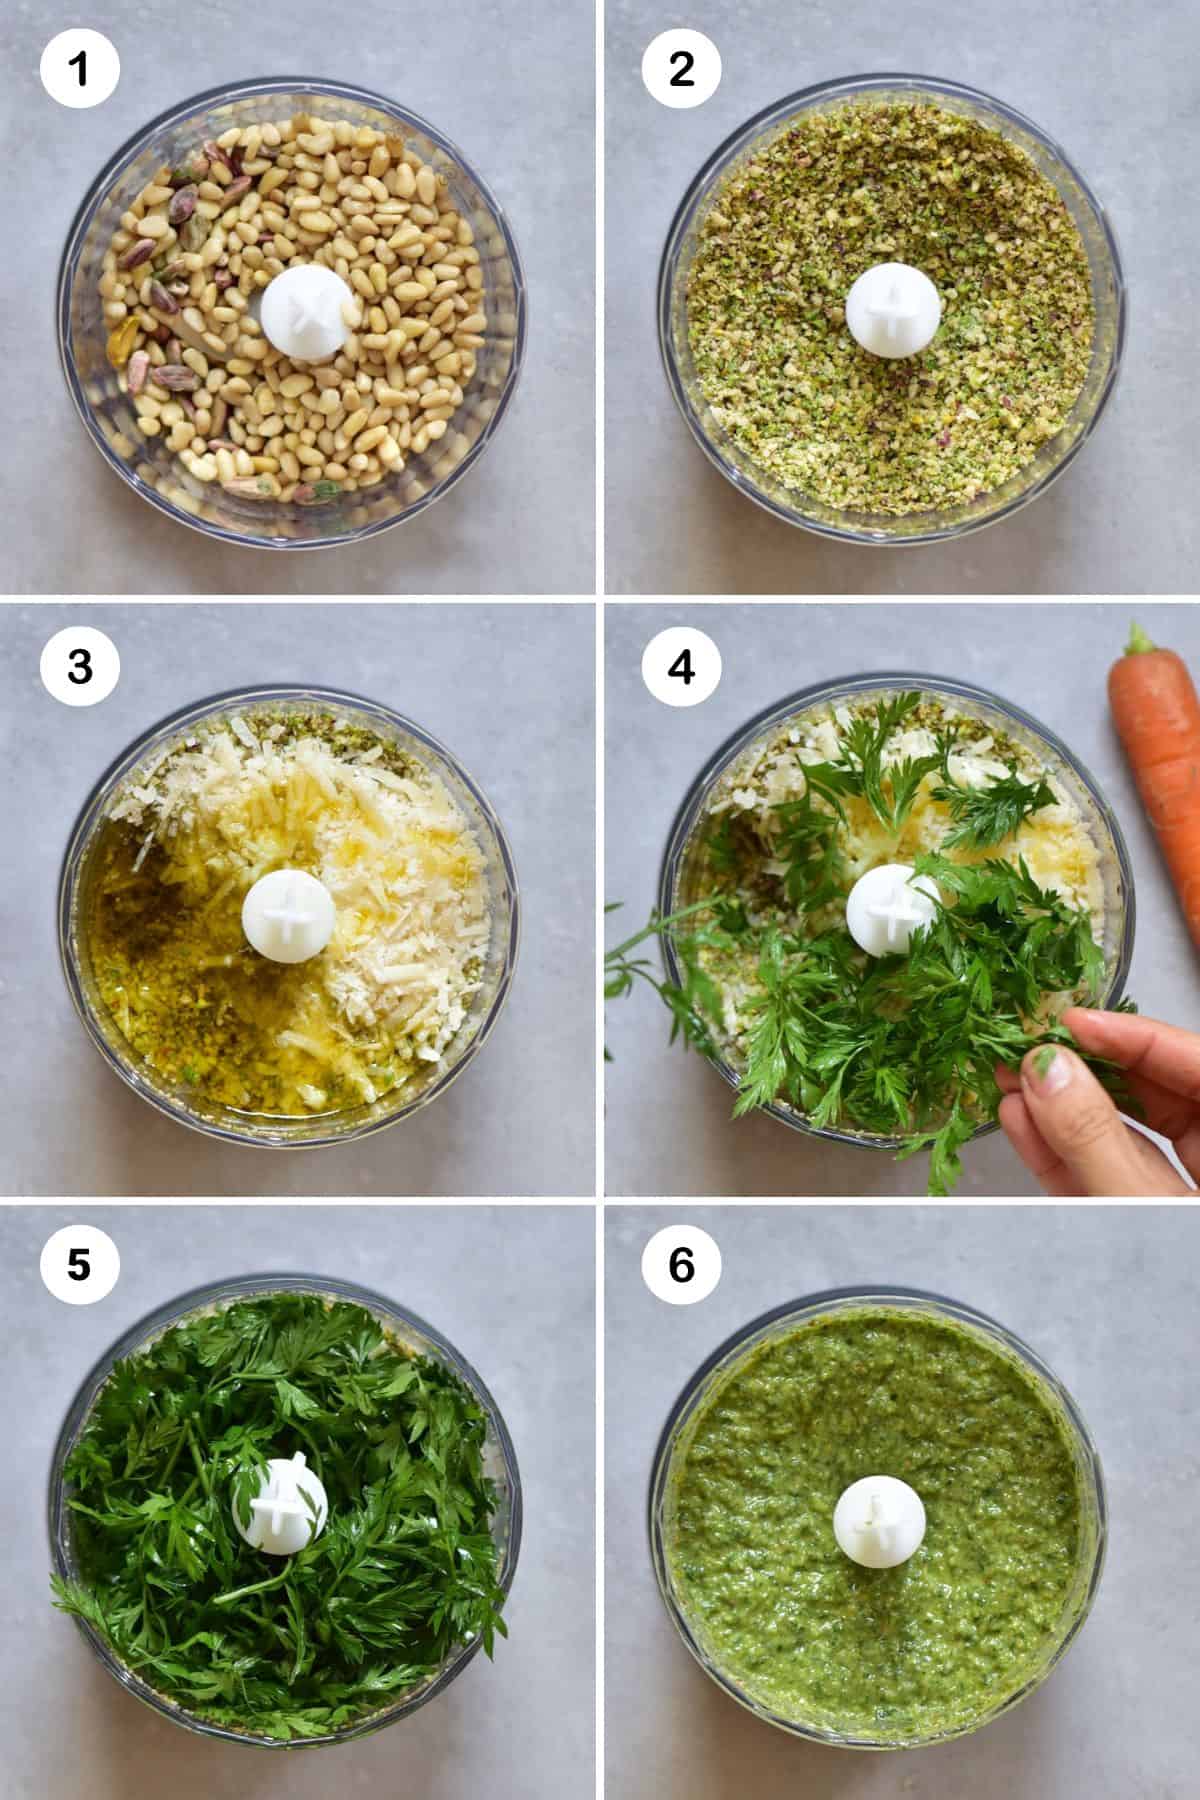 Steps for making pesto in a small food processor